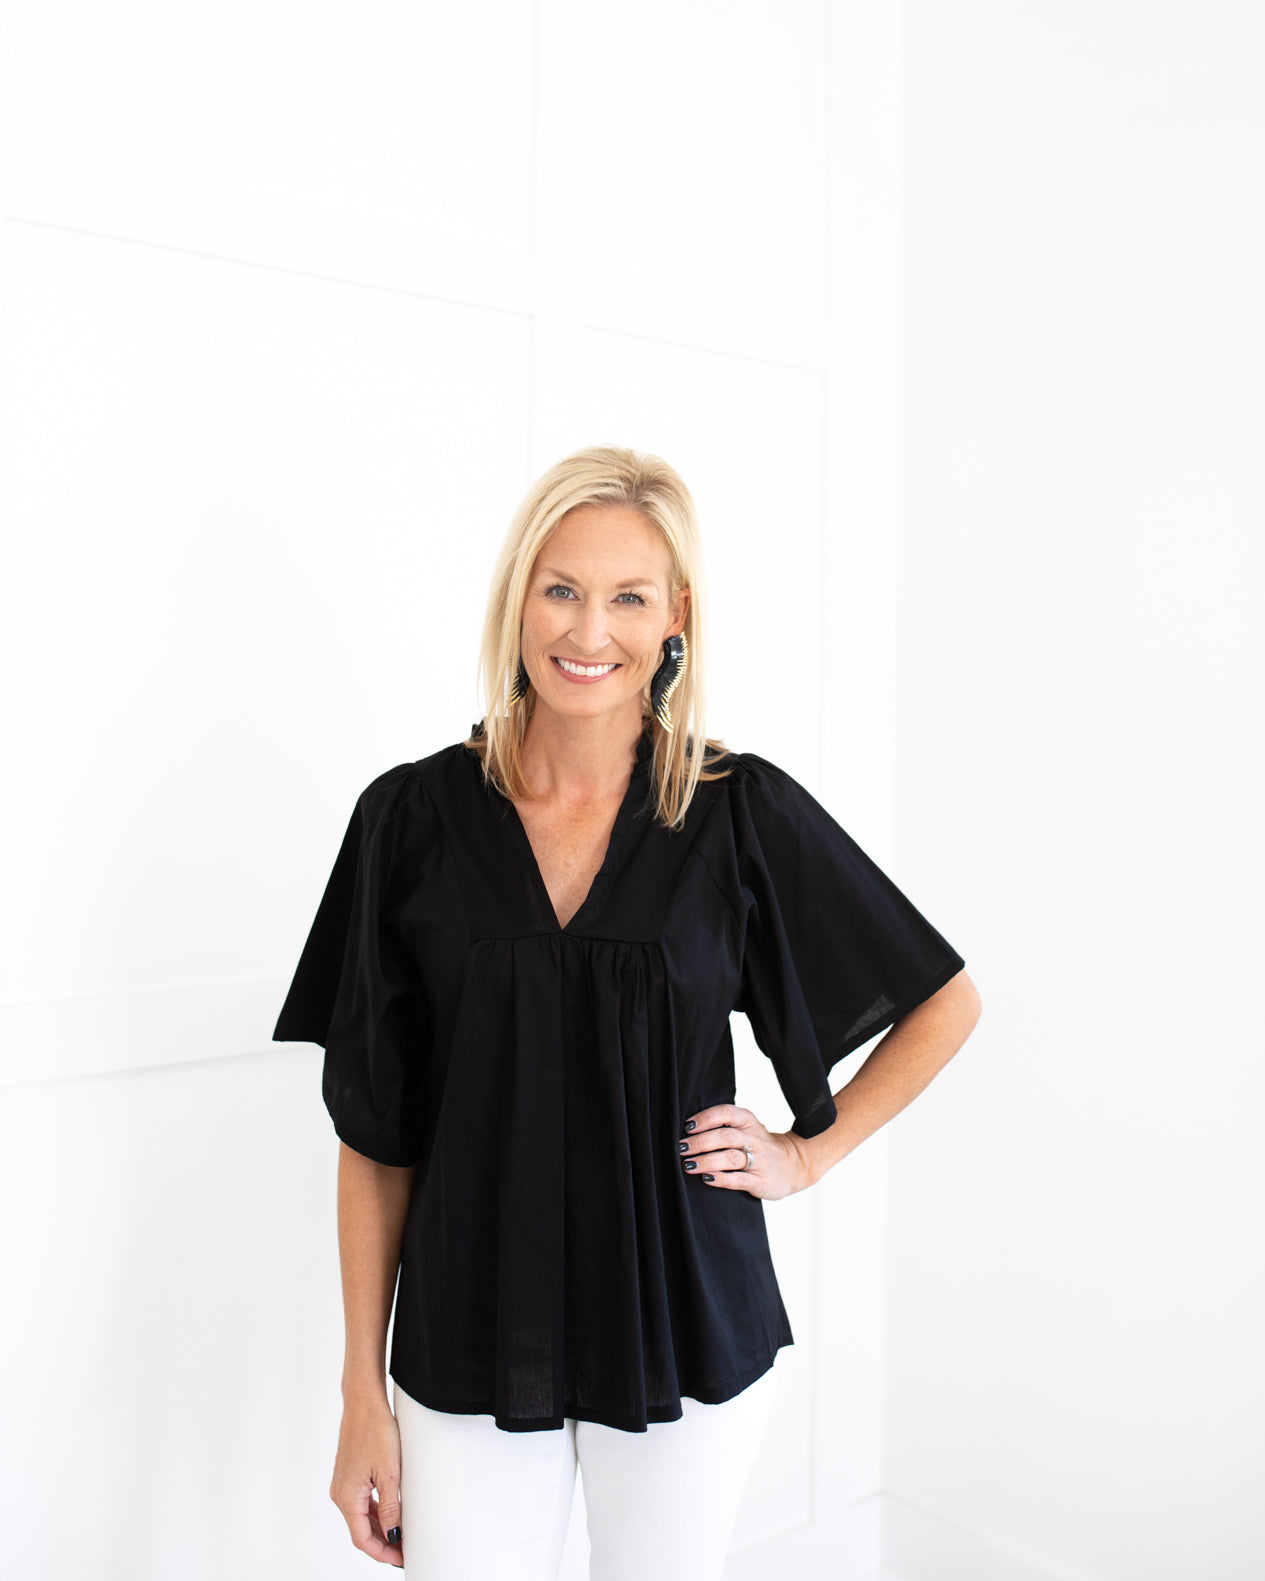 V-neck Ruffle Top in Black with Bell Sleeves